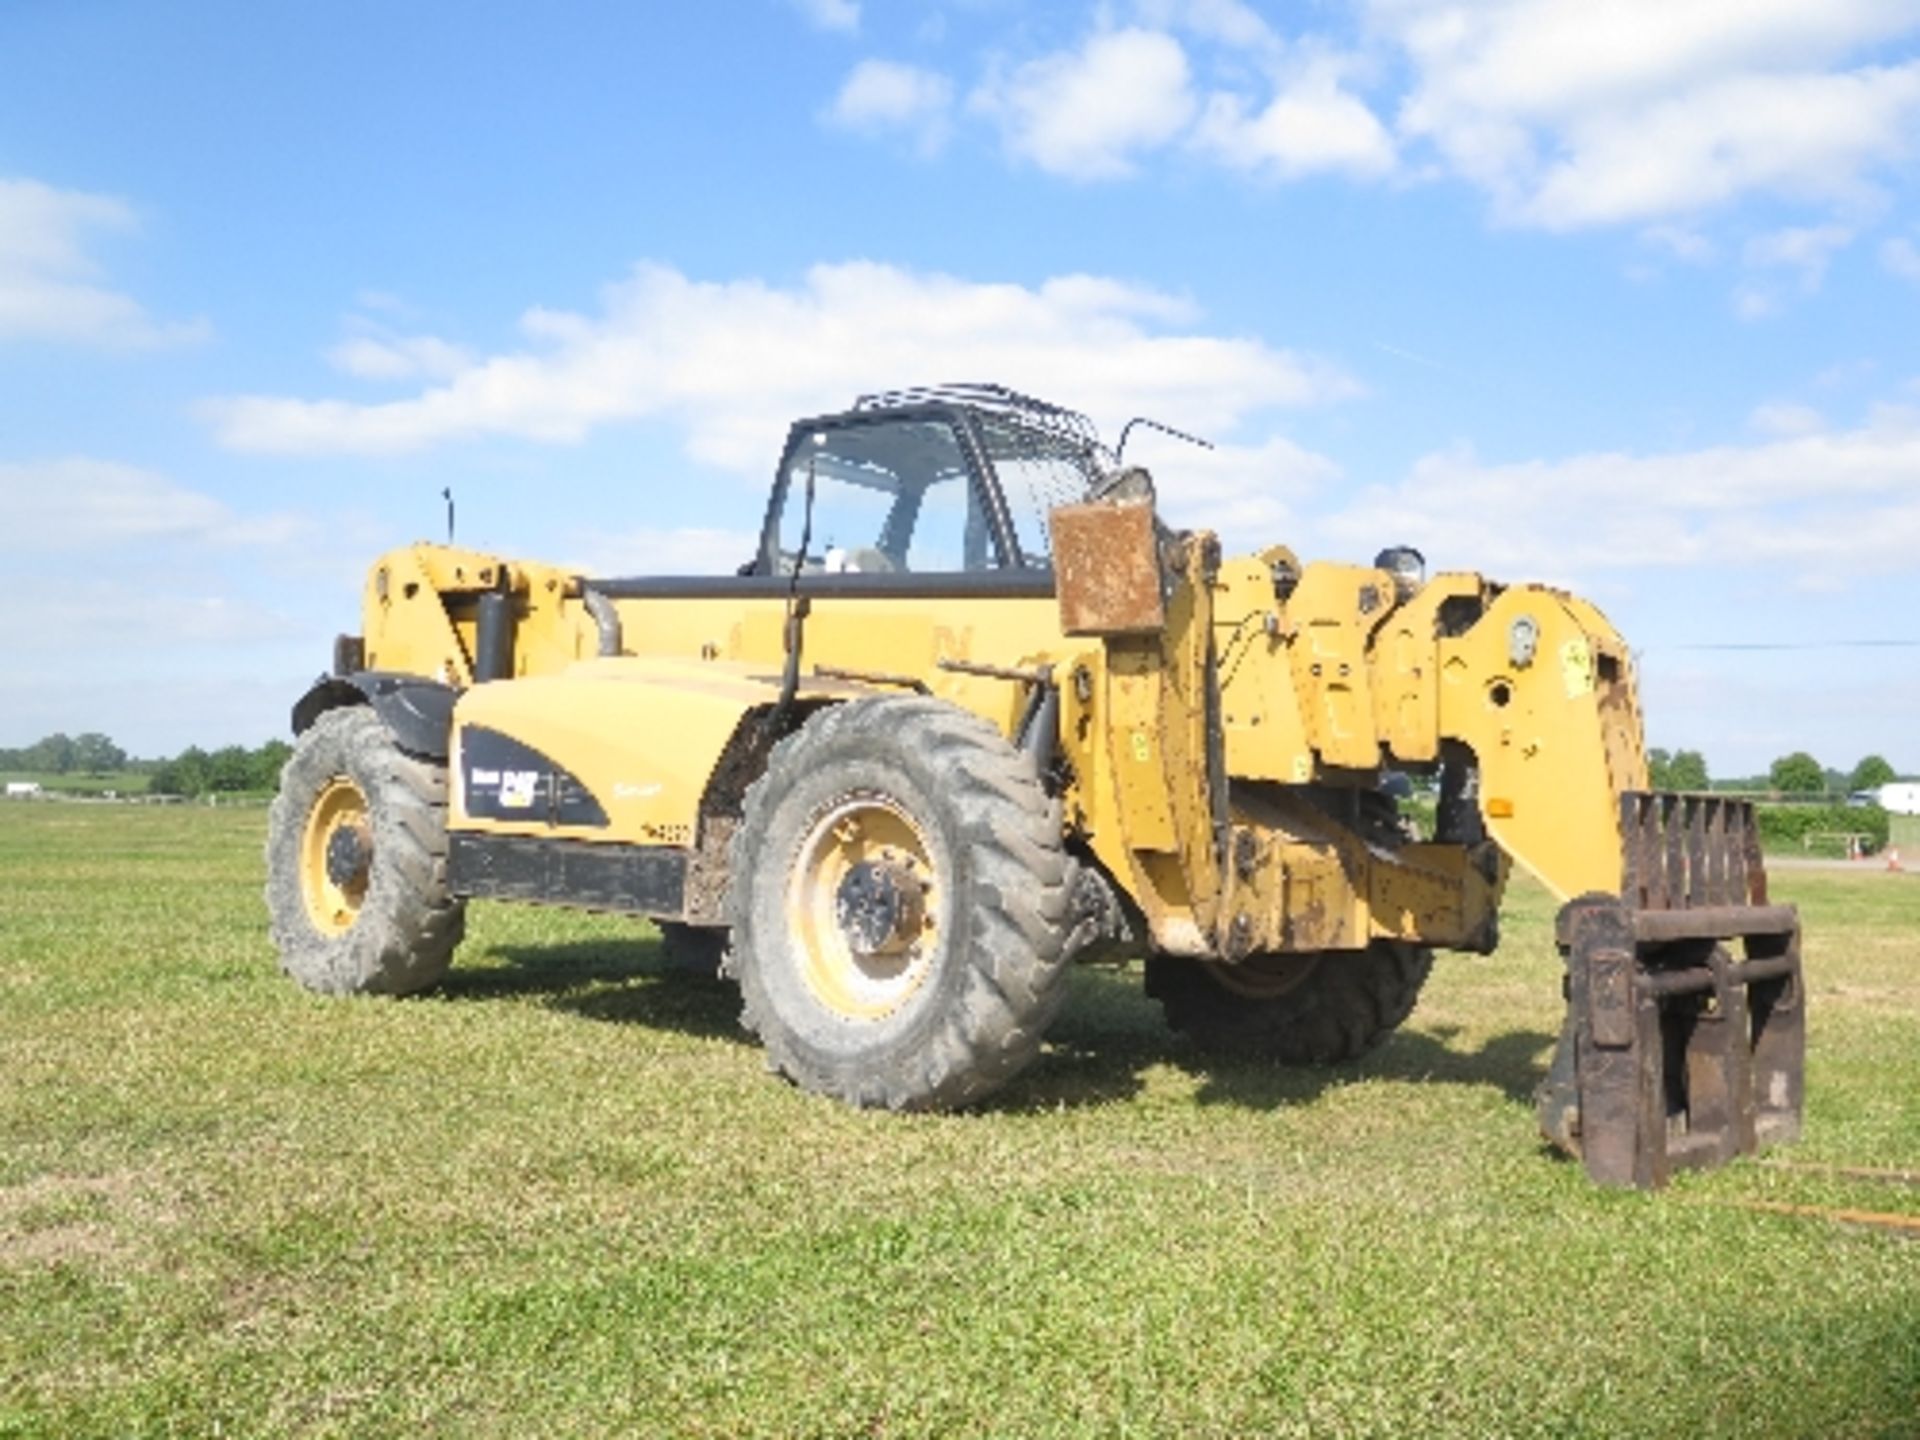 Caterpillar TH580B telehandler 4130 hrs 2007 154390
2 MUDGUARDS MISSING ALL LOTS are SOLD AS SEEN